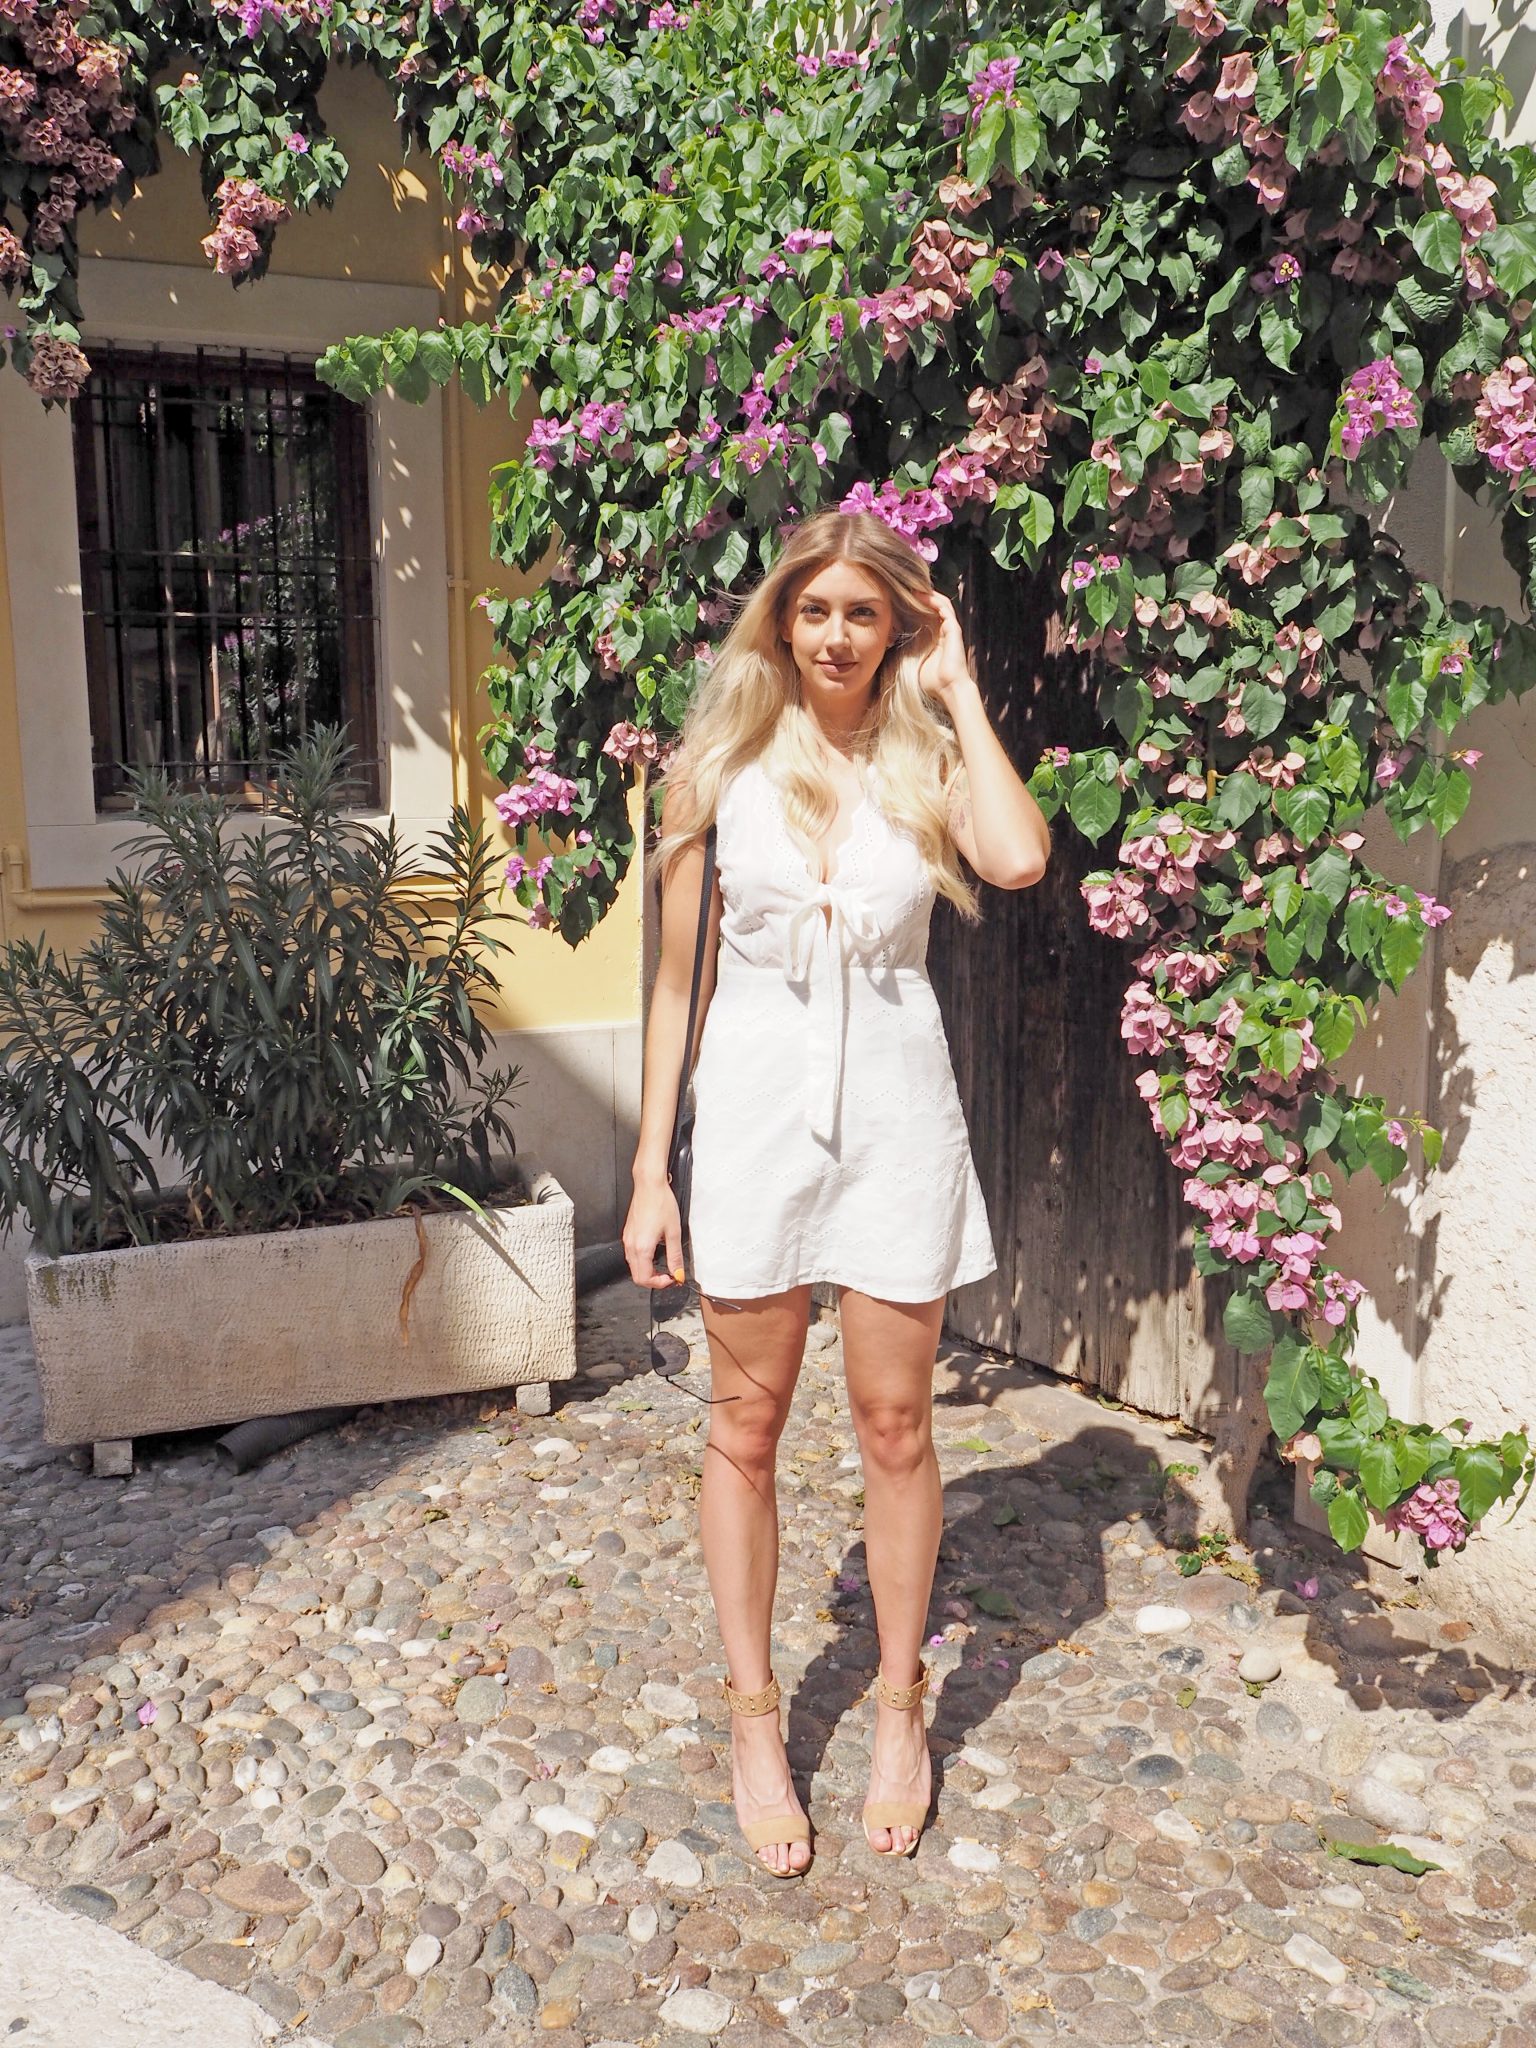 Laura Kate Lucas - Manchester Fashion, Travel and Lifestyle Blogger | Verona Italy Outfit Travel Dress